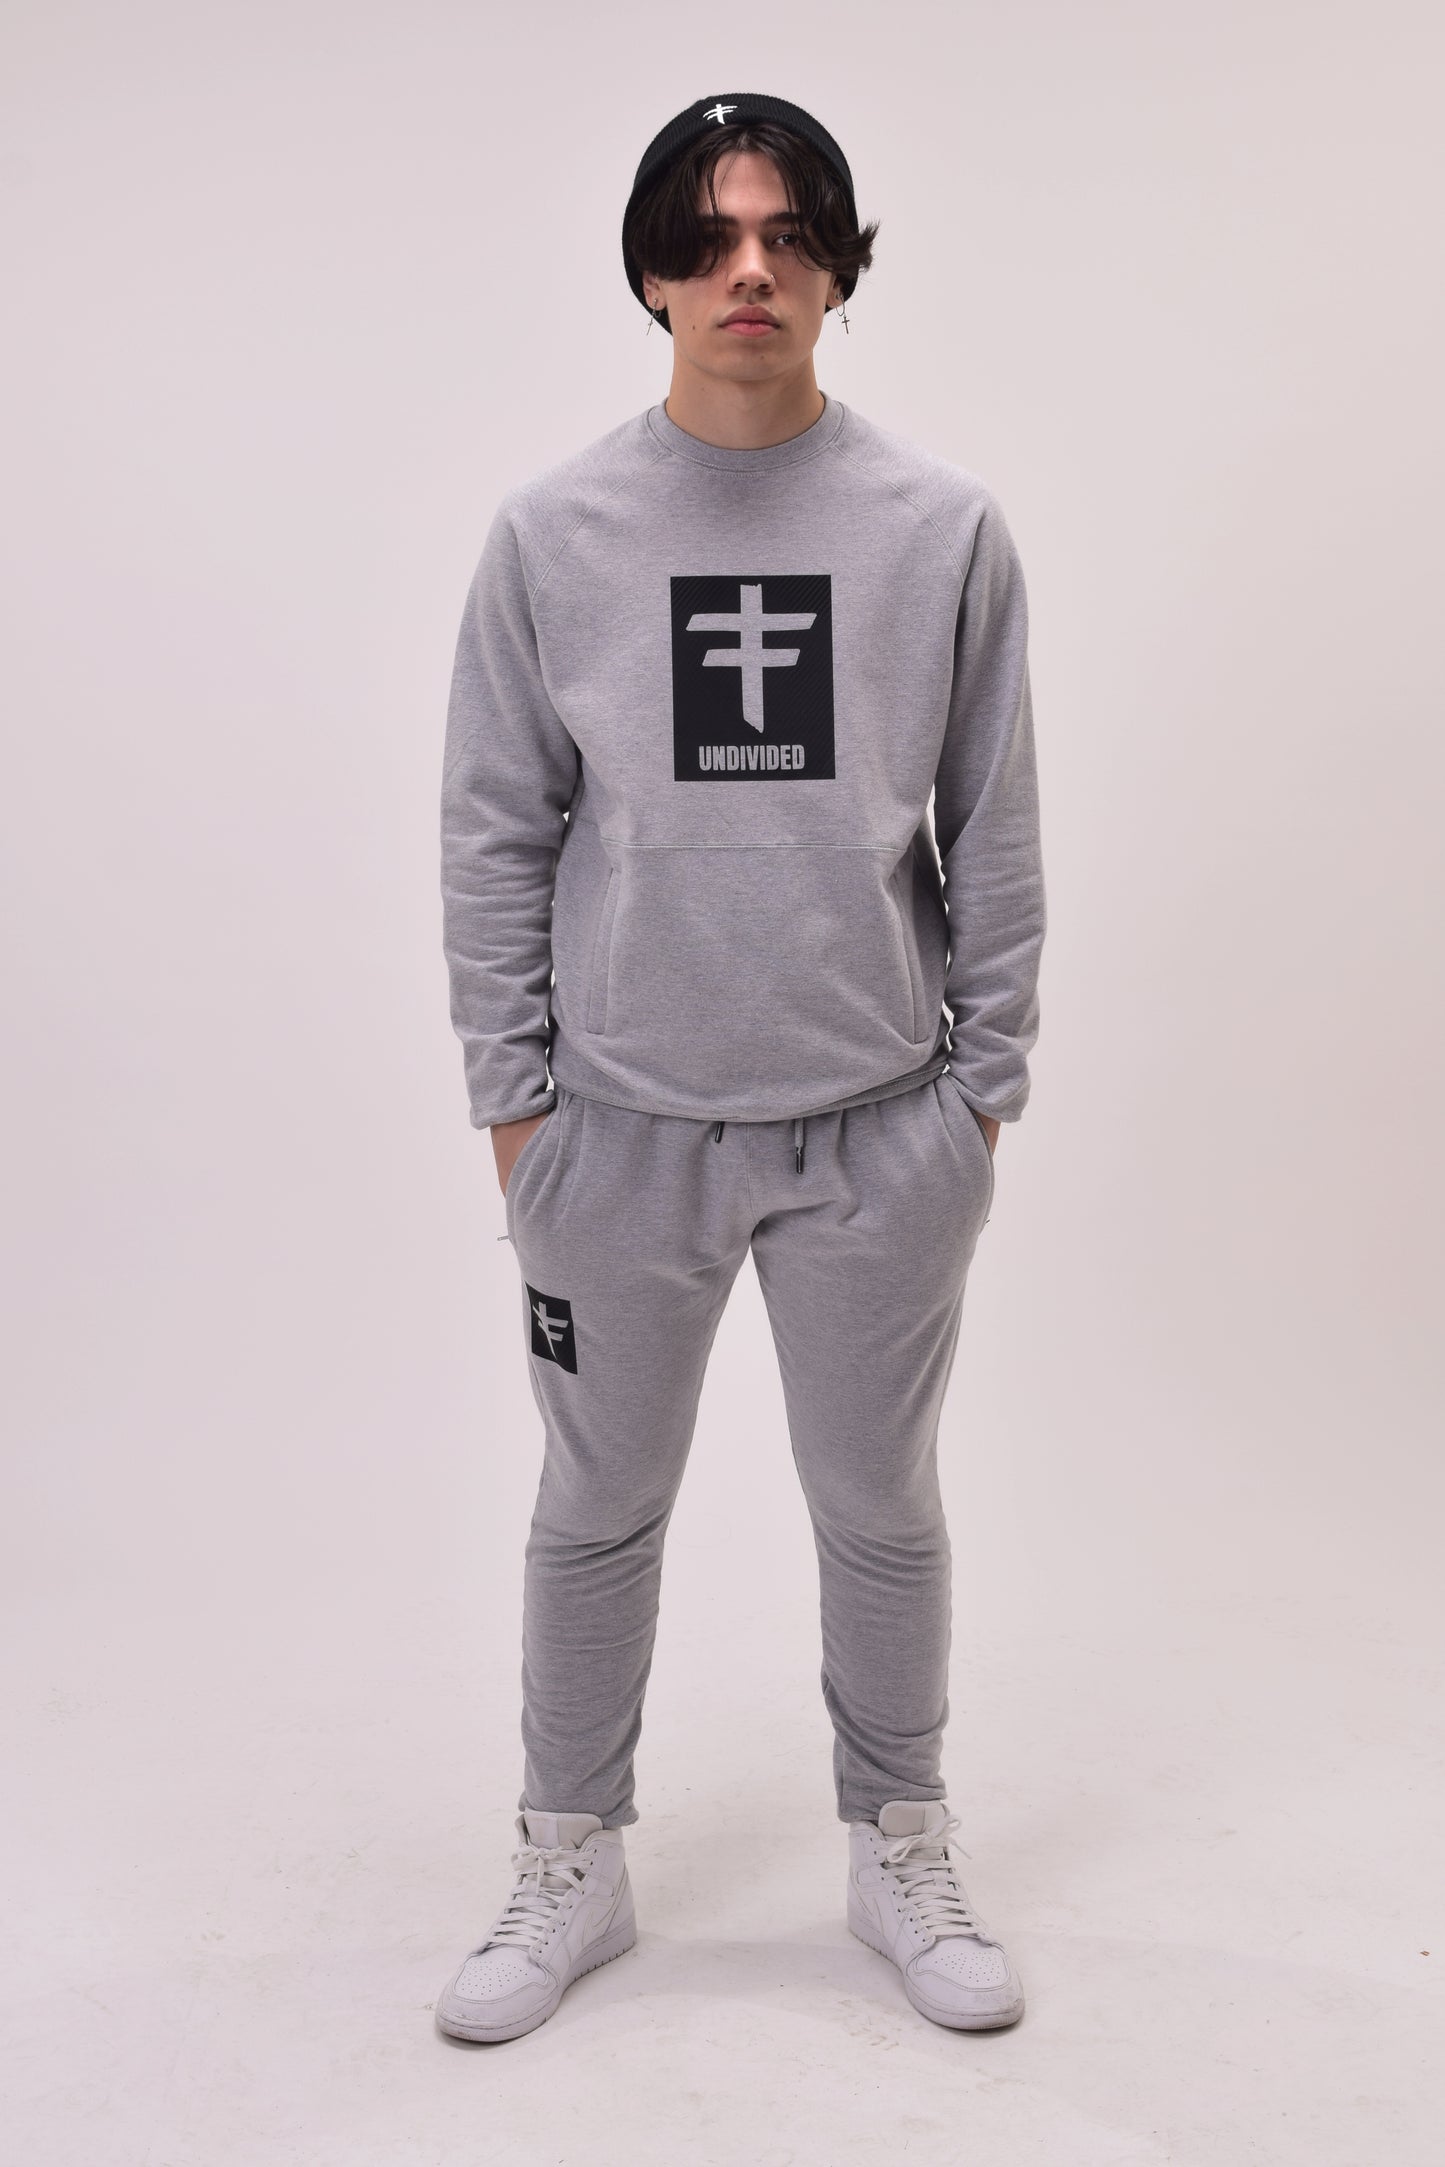 UNDIVIDED Grey  Tracksuit With Carbon Fibre Print